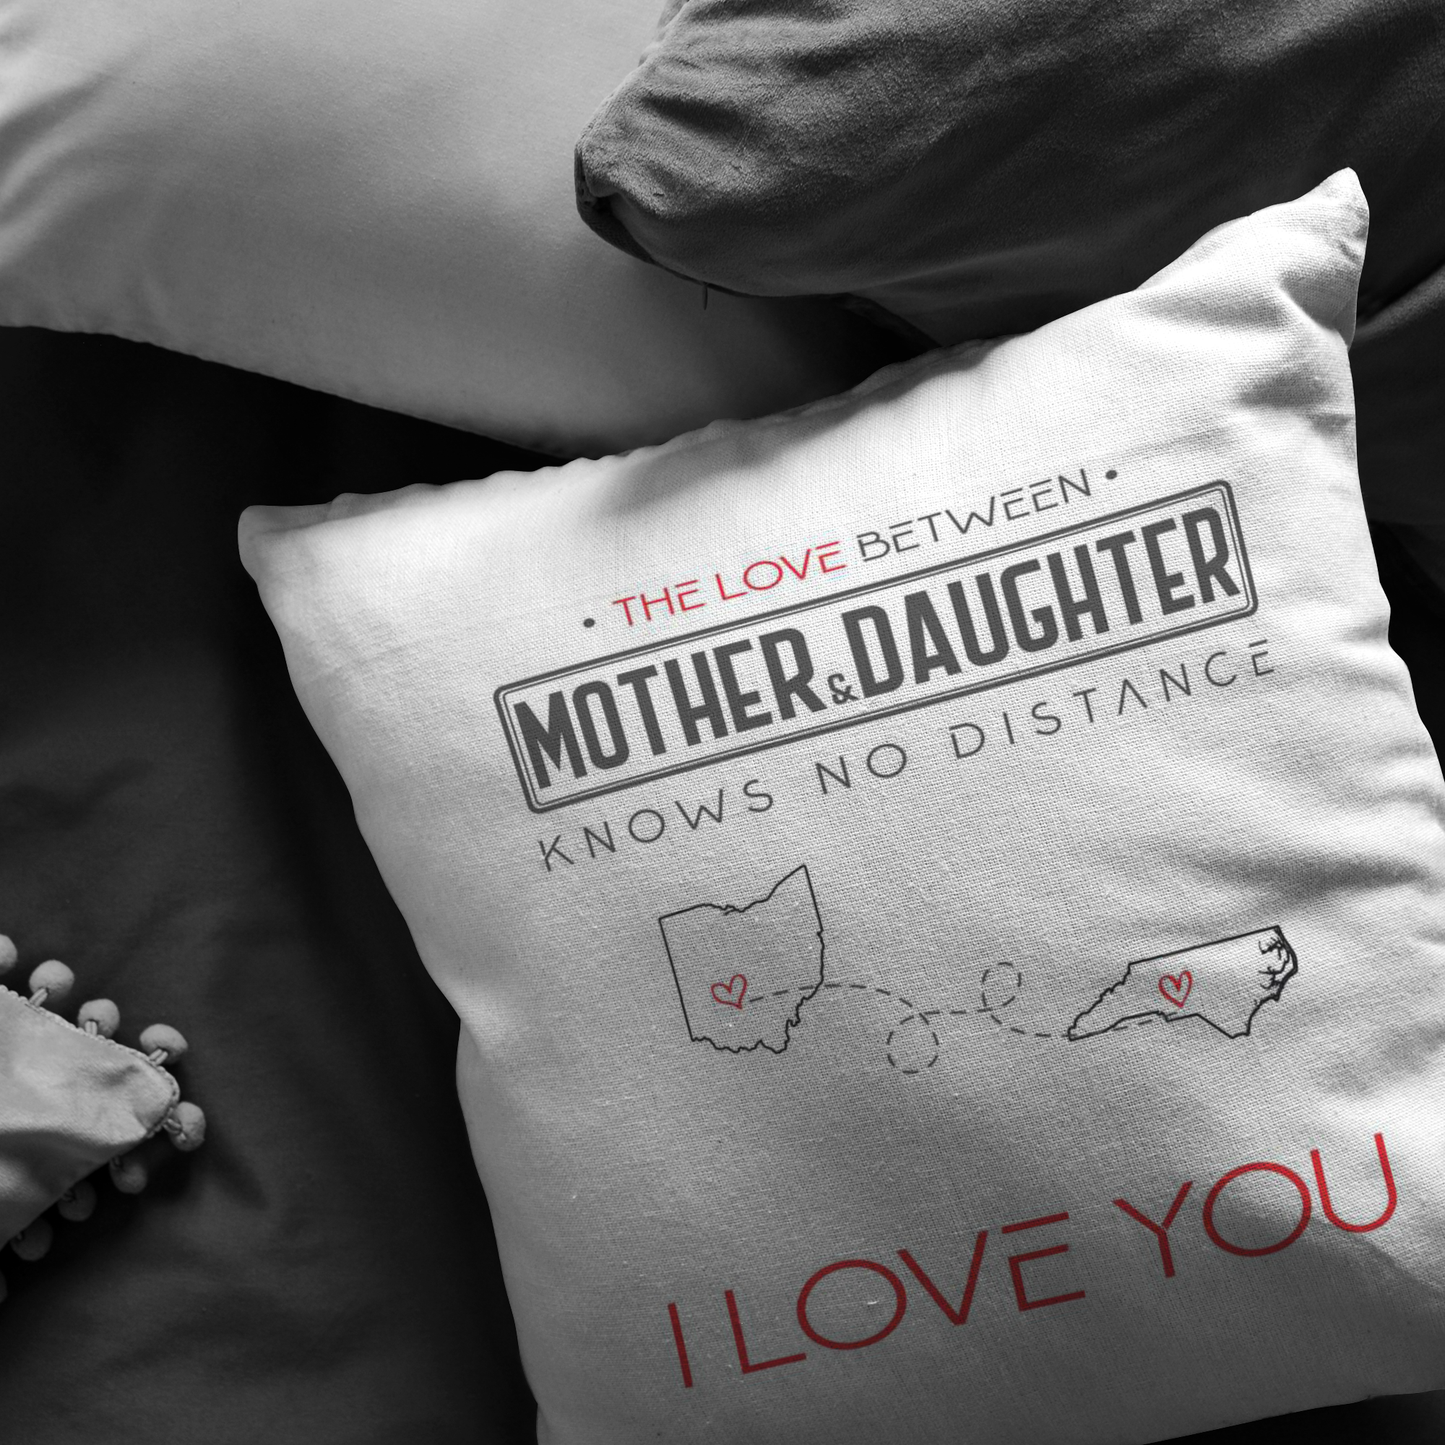 ND-PL21408250-sp-24274 - [ Ohio | North Carolina ]Mothers Day Gifts From Daughter - The Love Between Mother A